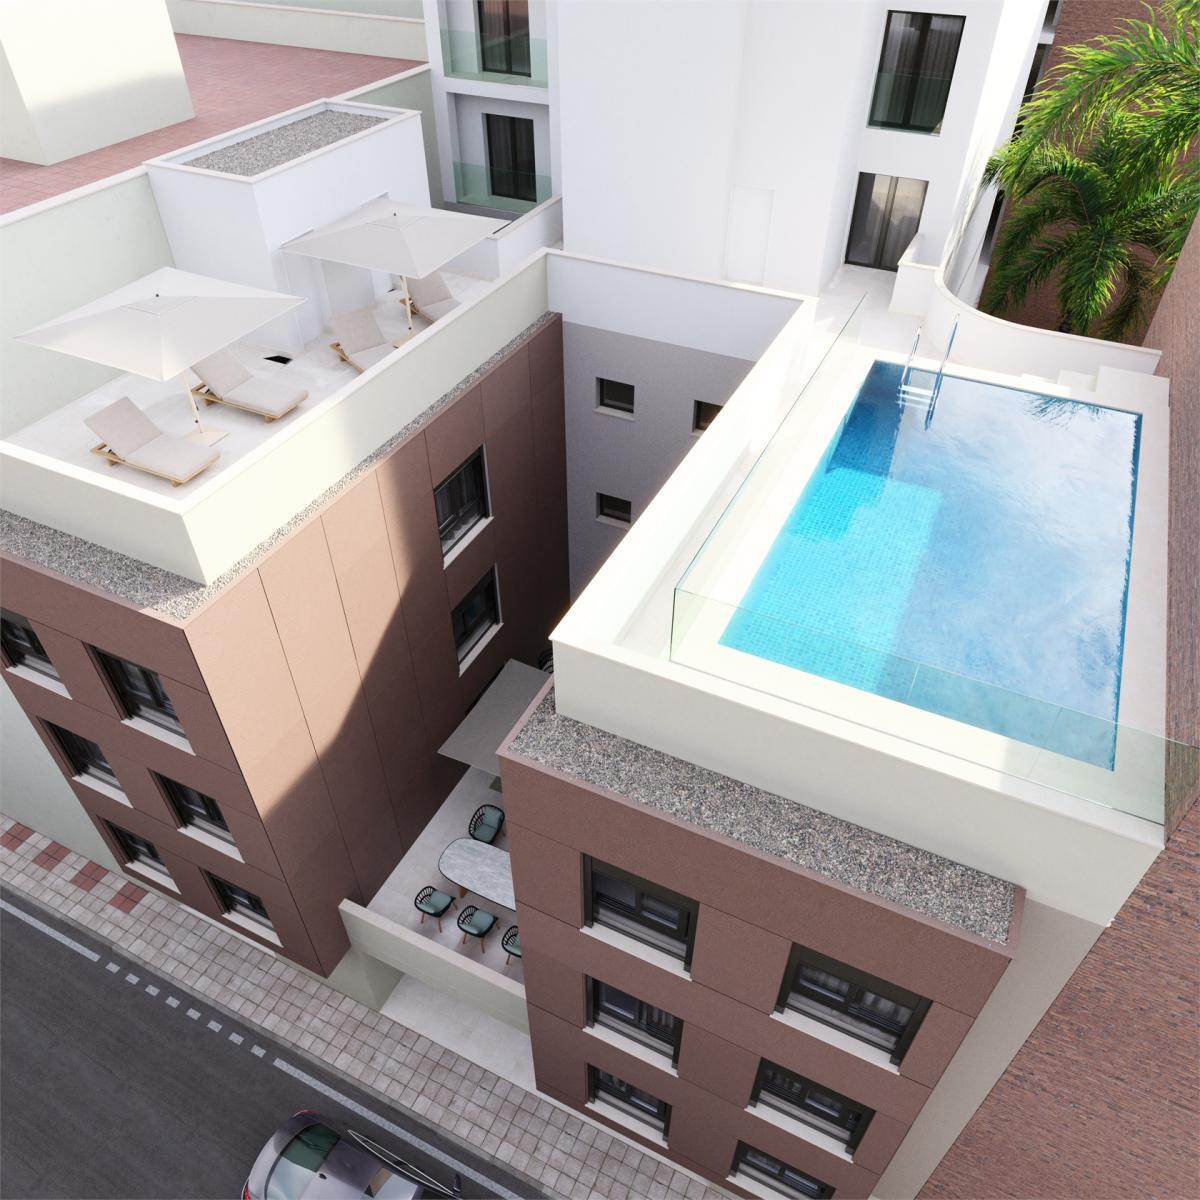 Picture of Apartment For Sale in Malaga, Malaga, Spain